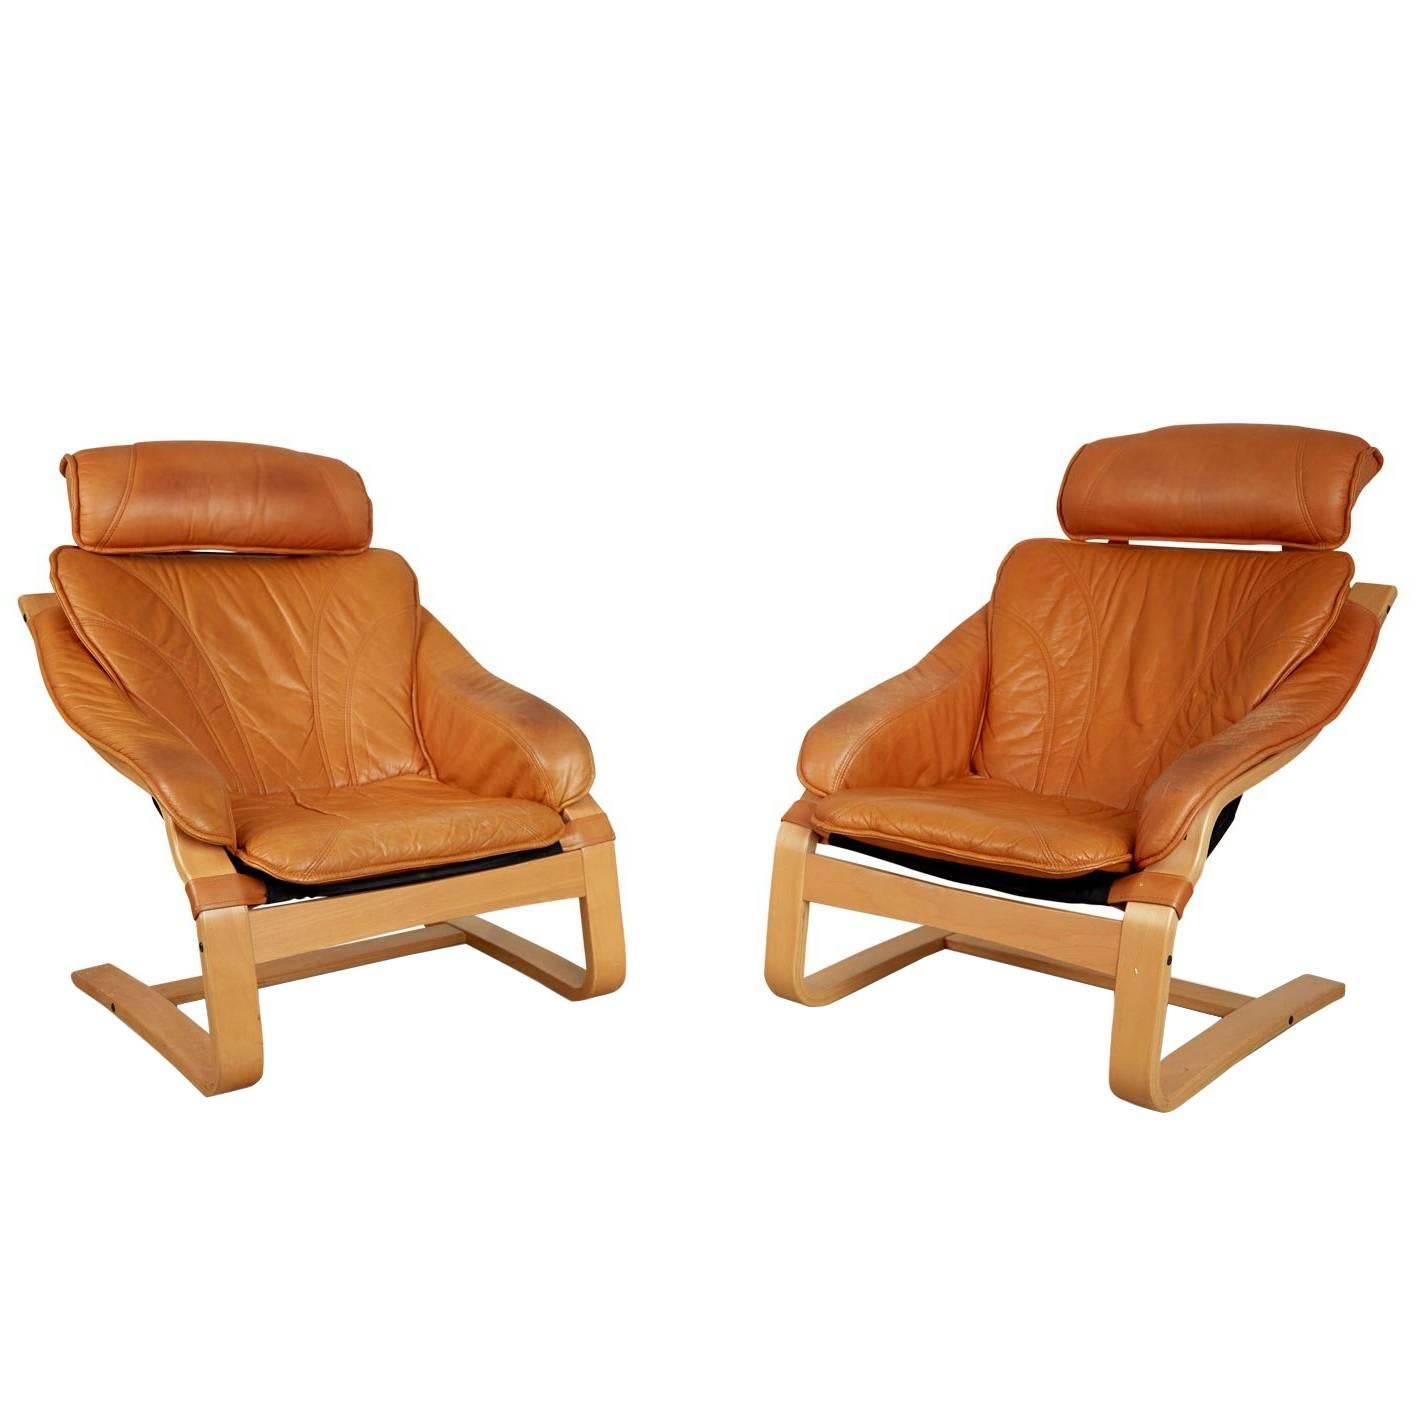 Pair of Leather Danish Modern Bentwood Lounge Chairs, circa 1970